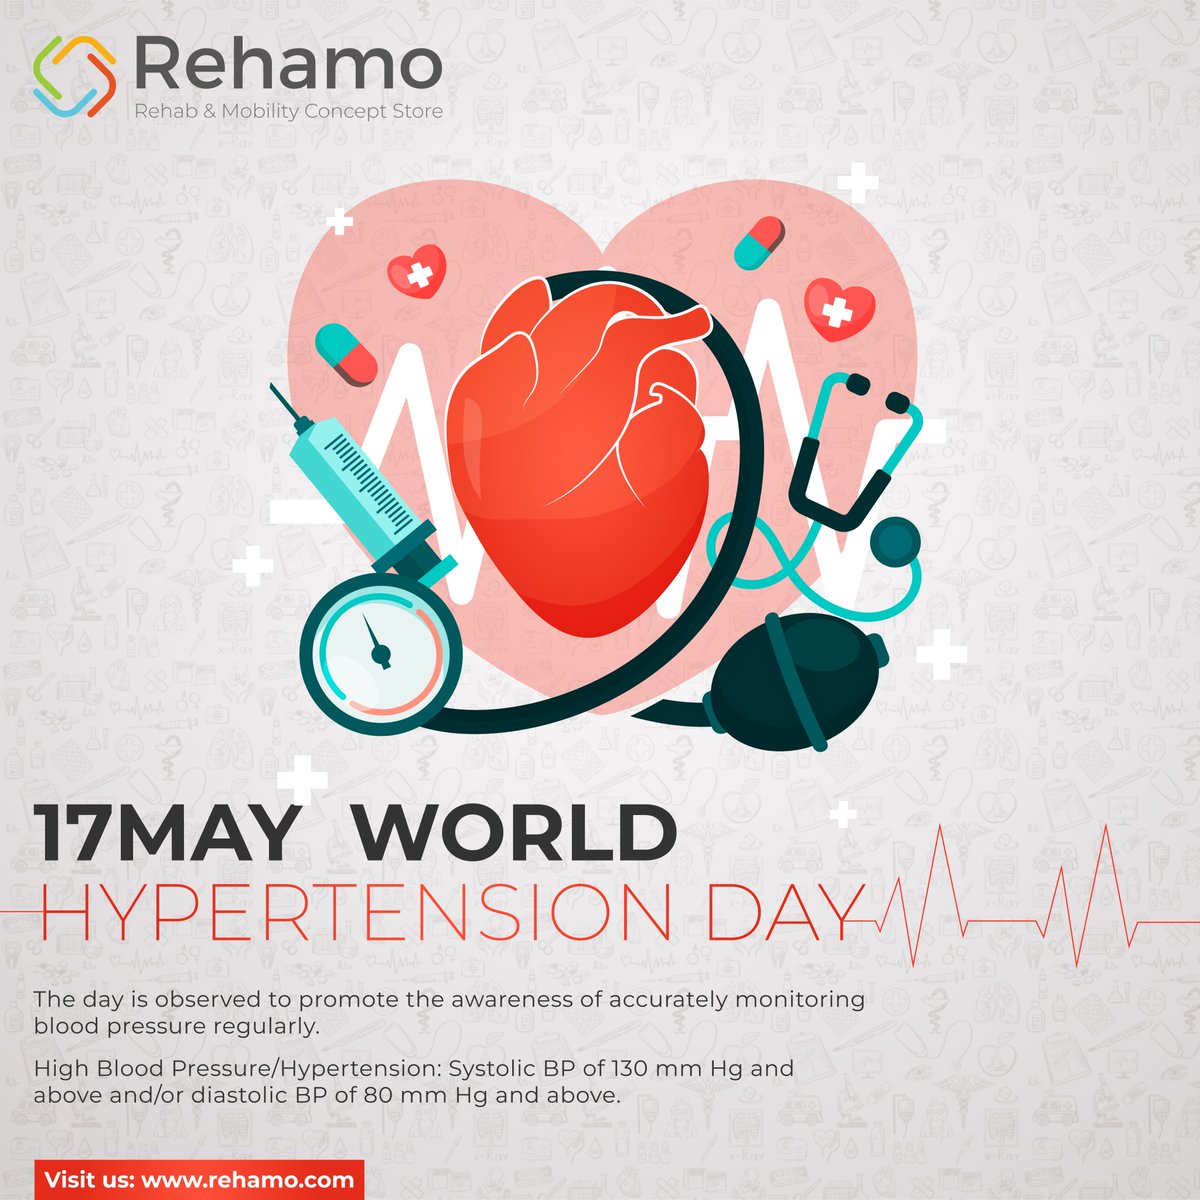 Measure Your Blood Pressure Accurately, Control It, Live Longer.
Known as a 'Silent Killer', hypertension is a condition which goes unnoticed without any symptoms, too.

#rehamo #rehabilitation #mobility #homehealthcaresolutions #hypertension #worldhypertensionday #bloodpressure